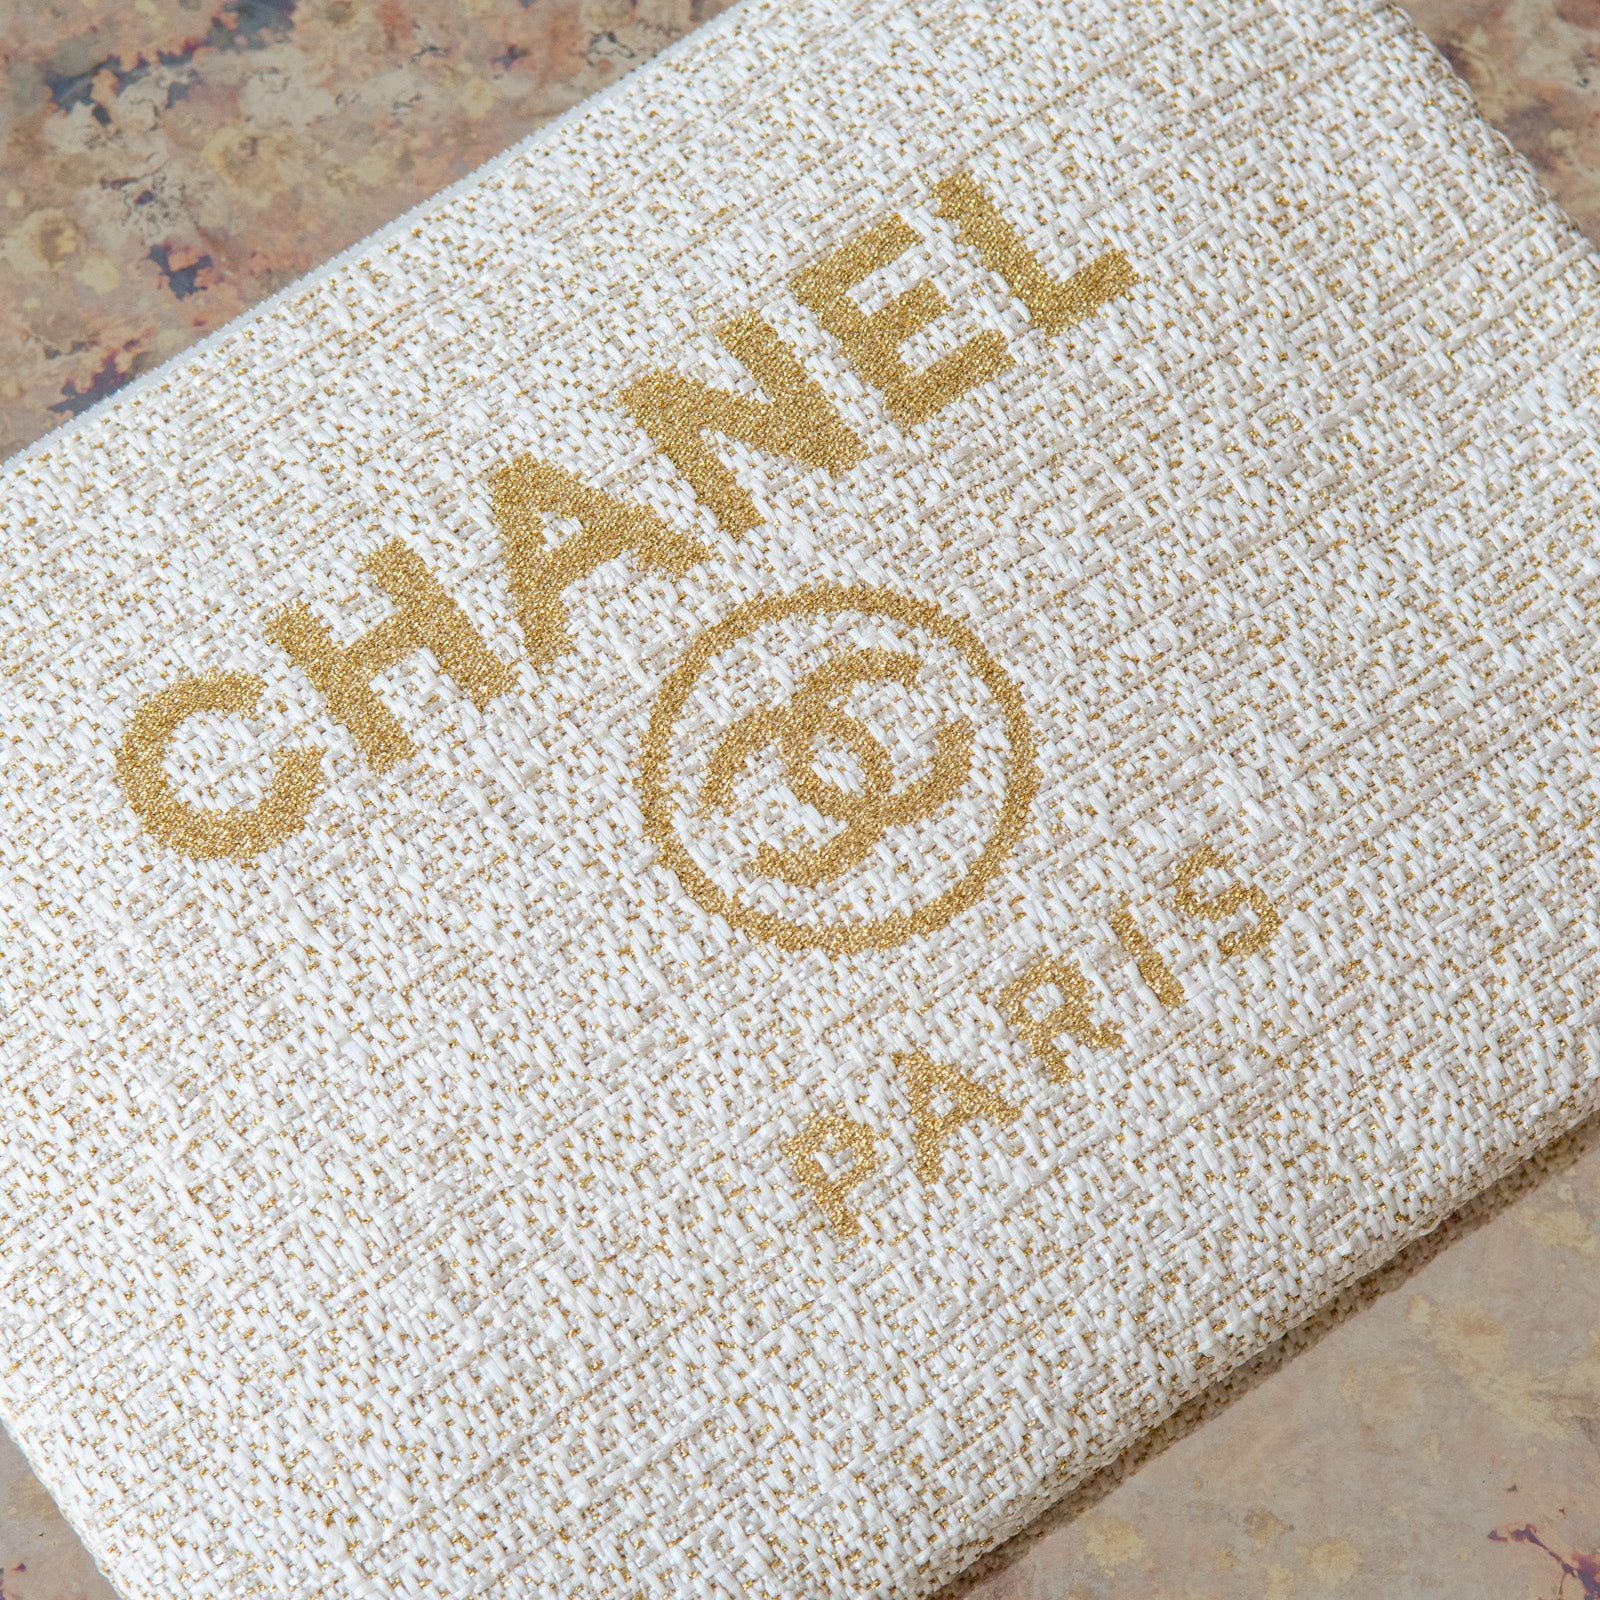 Chanel Cream Deauville Large Clutch Bag - Image 2 of 8